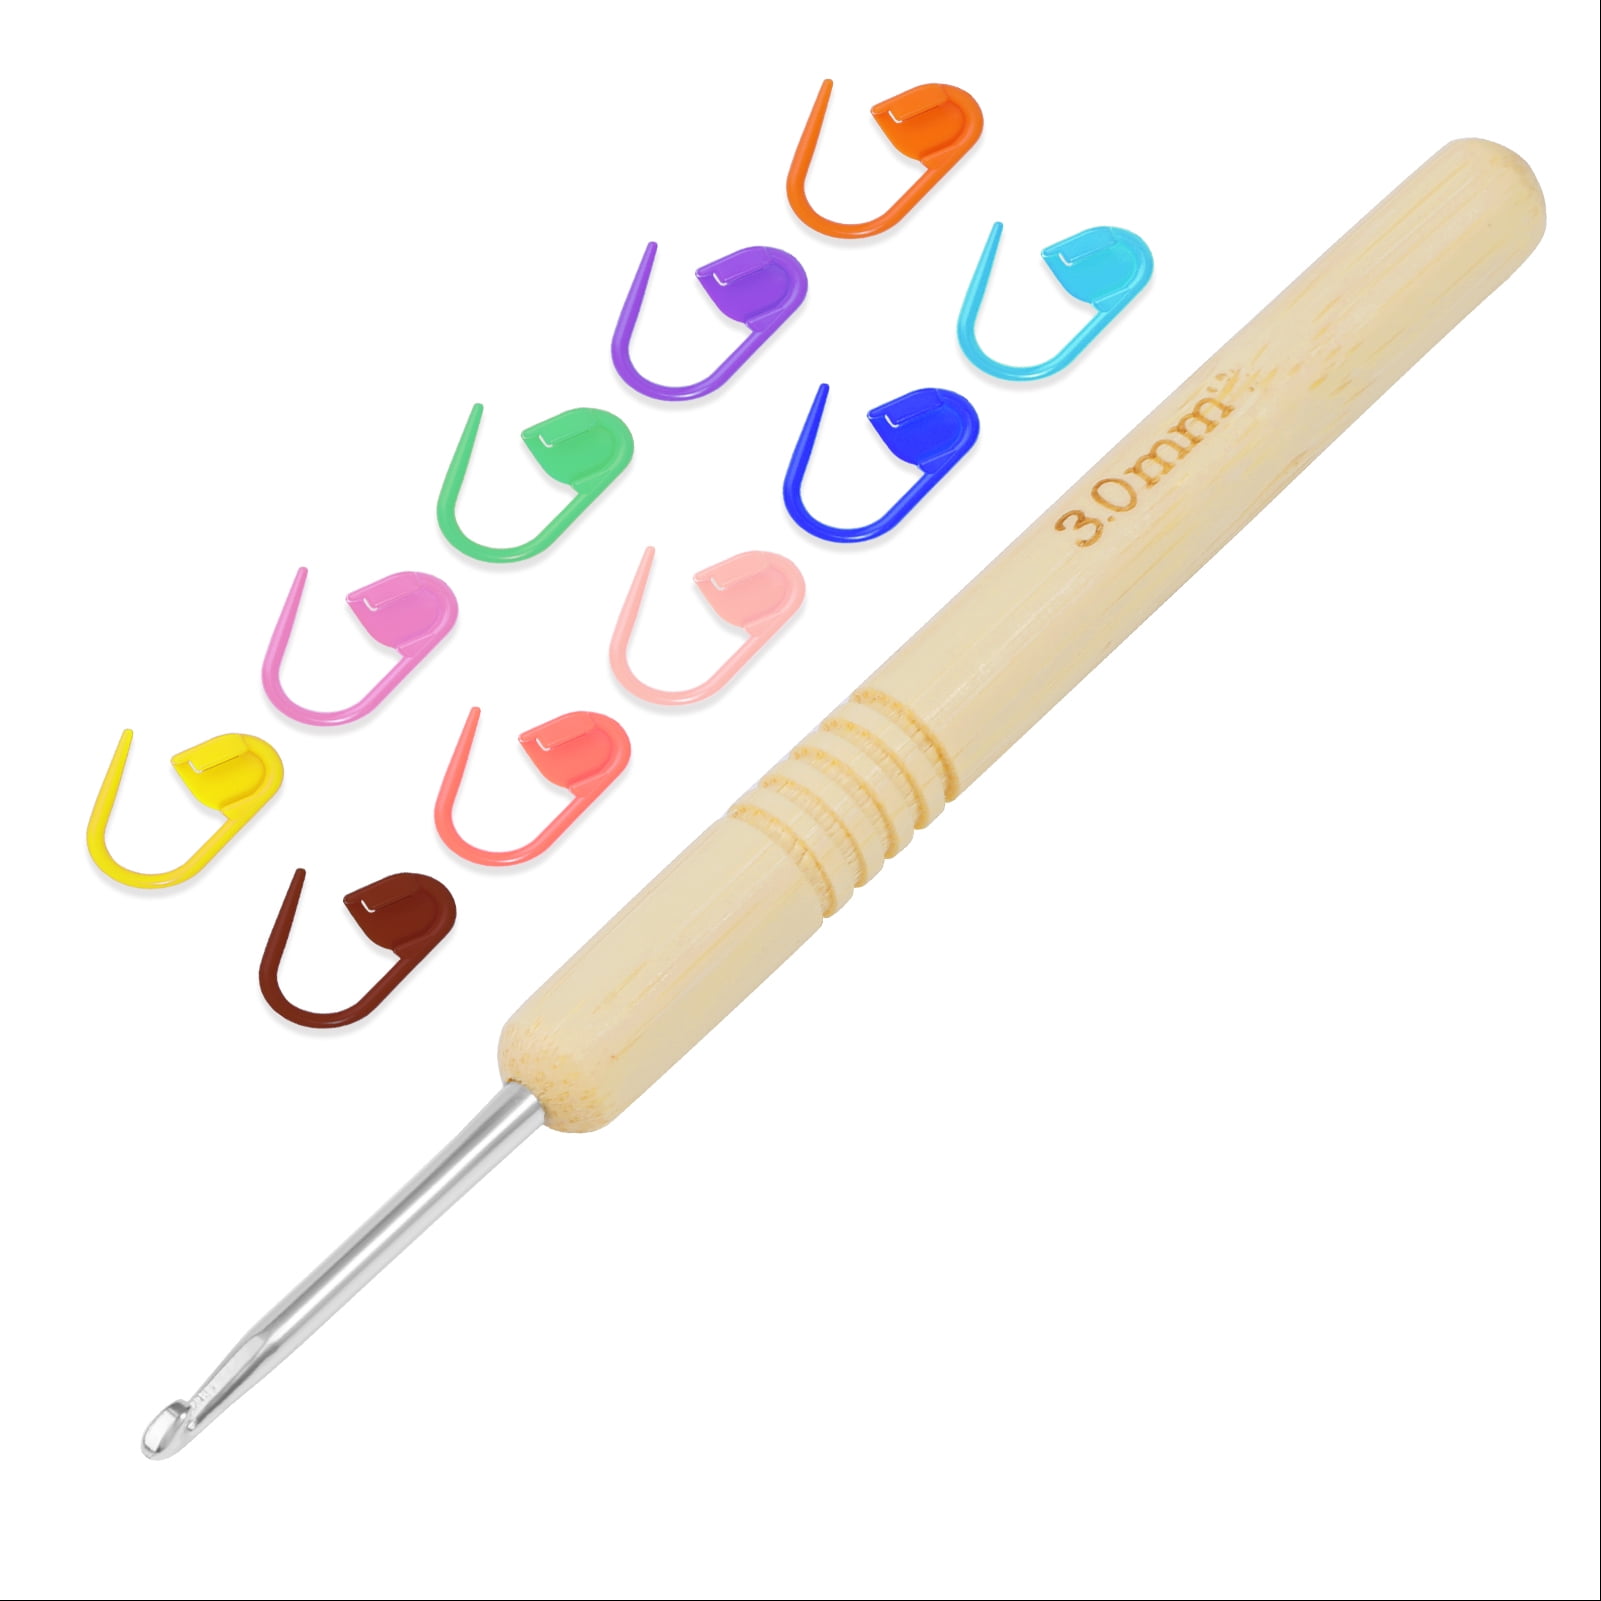 3mm Crochet Hook, Wooden Handle Crochet, Ergonomic Crochet with 10 PCS  Stitch Markers for Arthritic Hand, and Beginners and Lovers DIY 